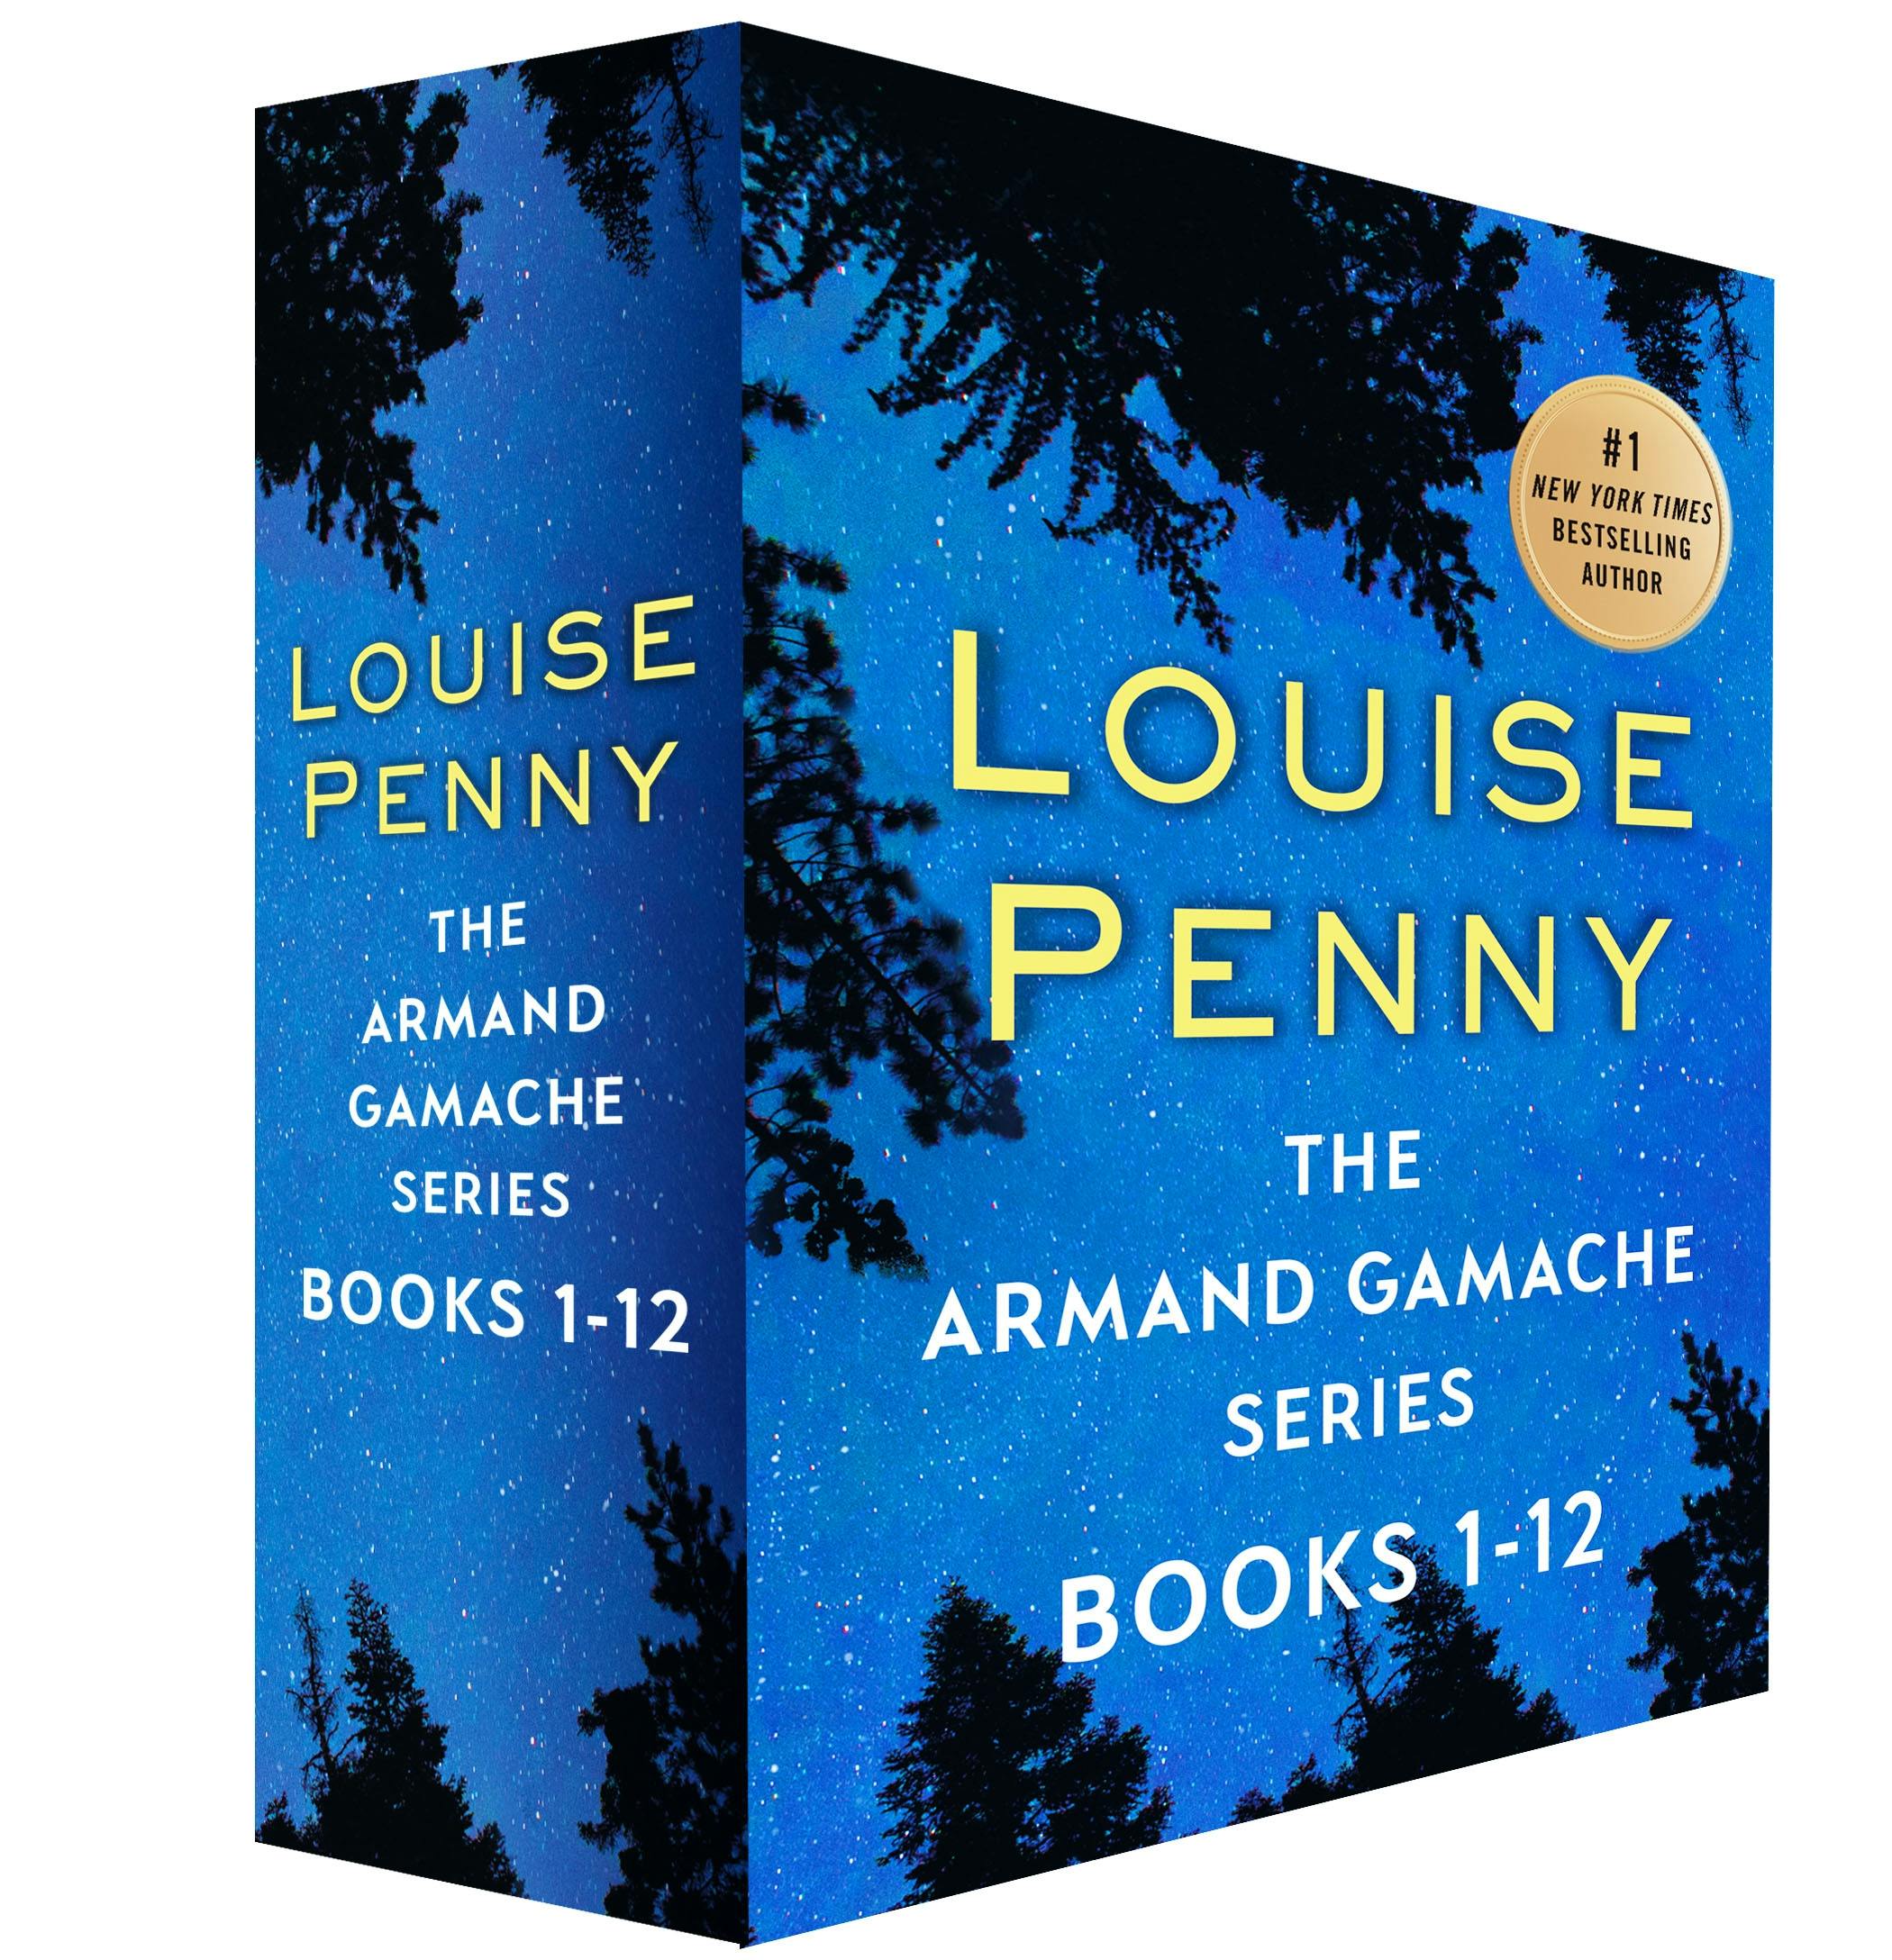 Find your way to Louise Penny by land, book or new 'Three Pines' series